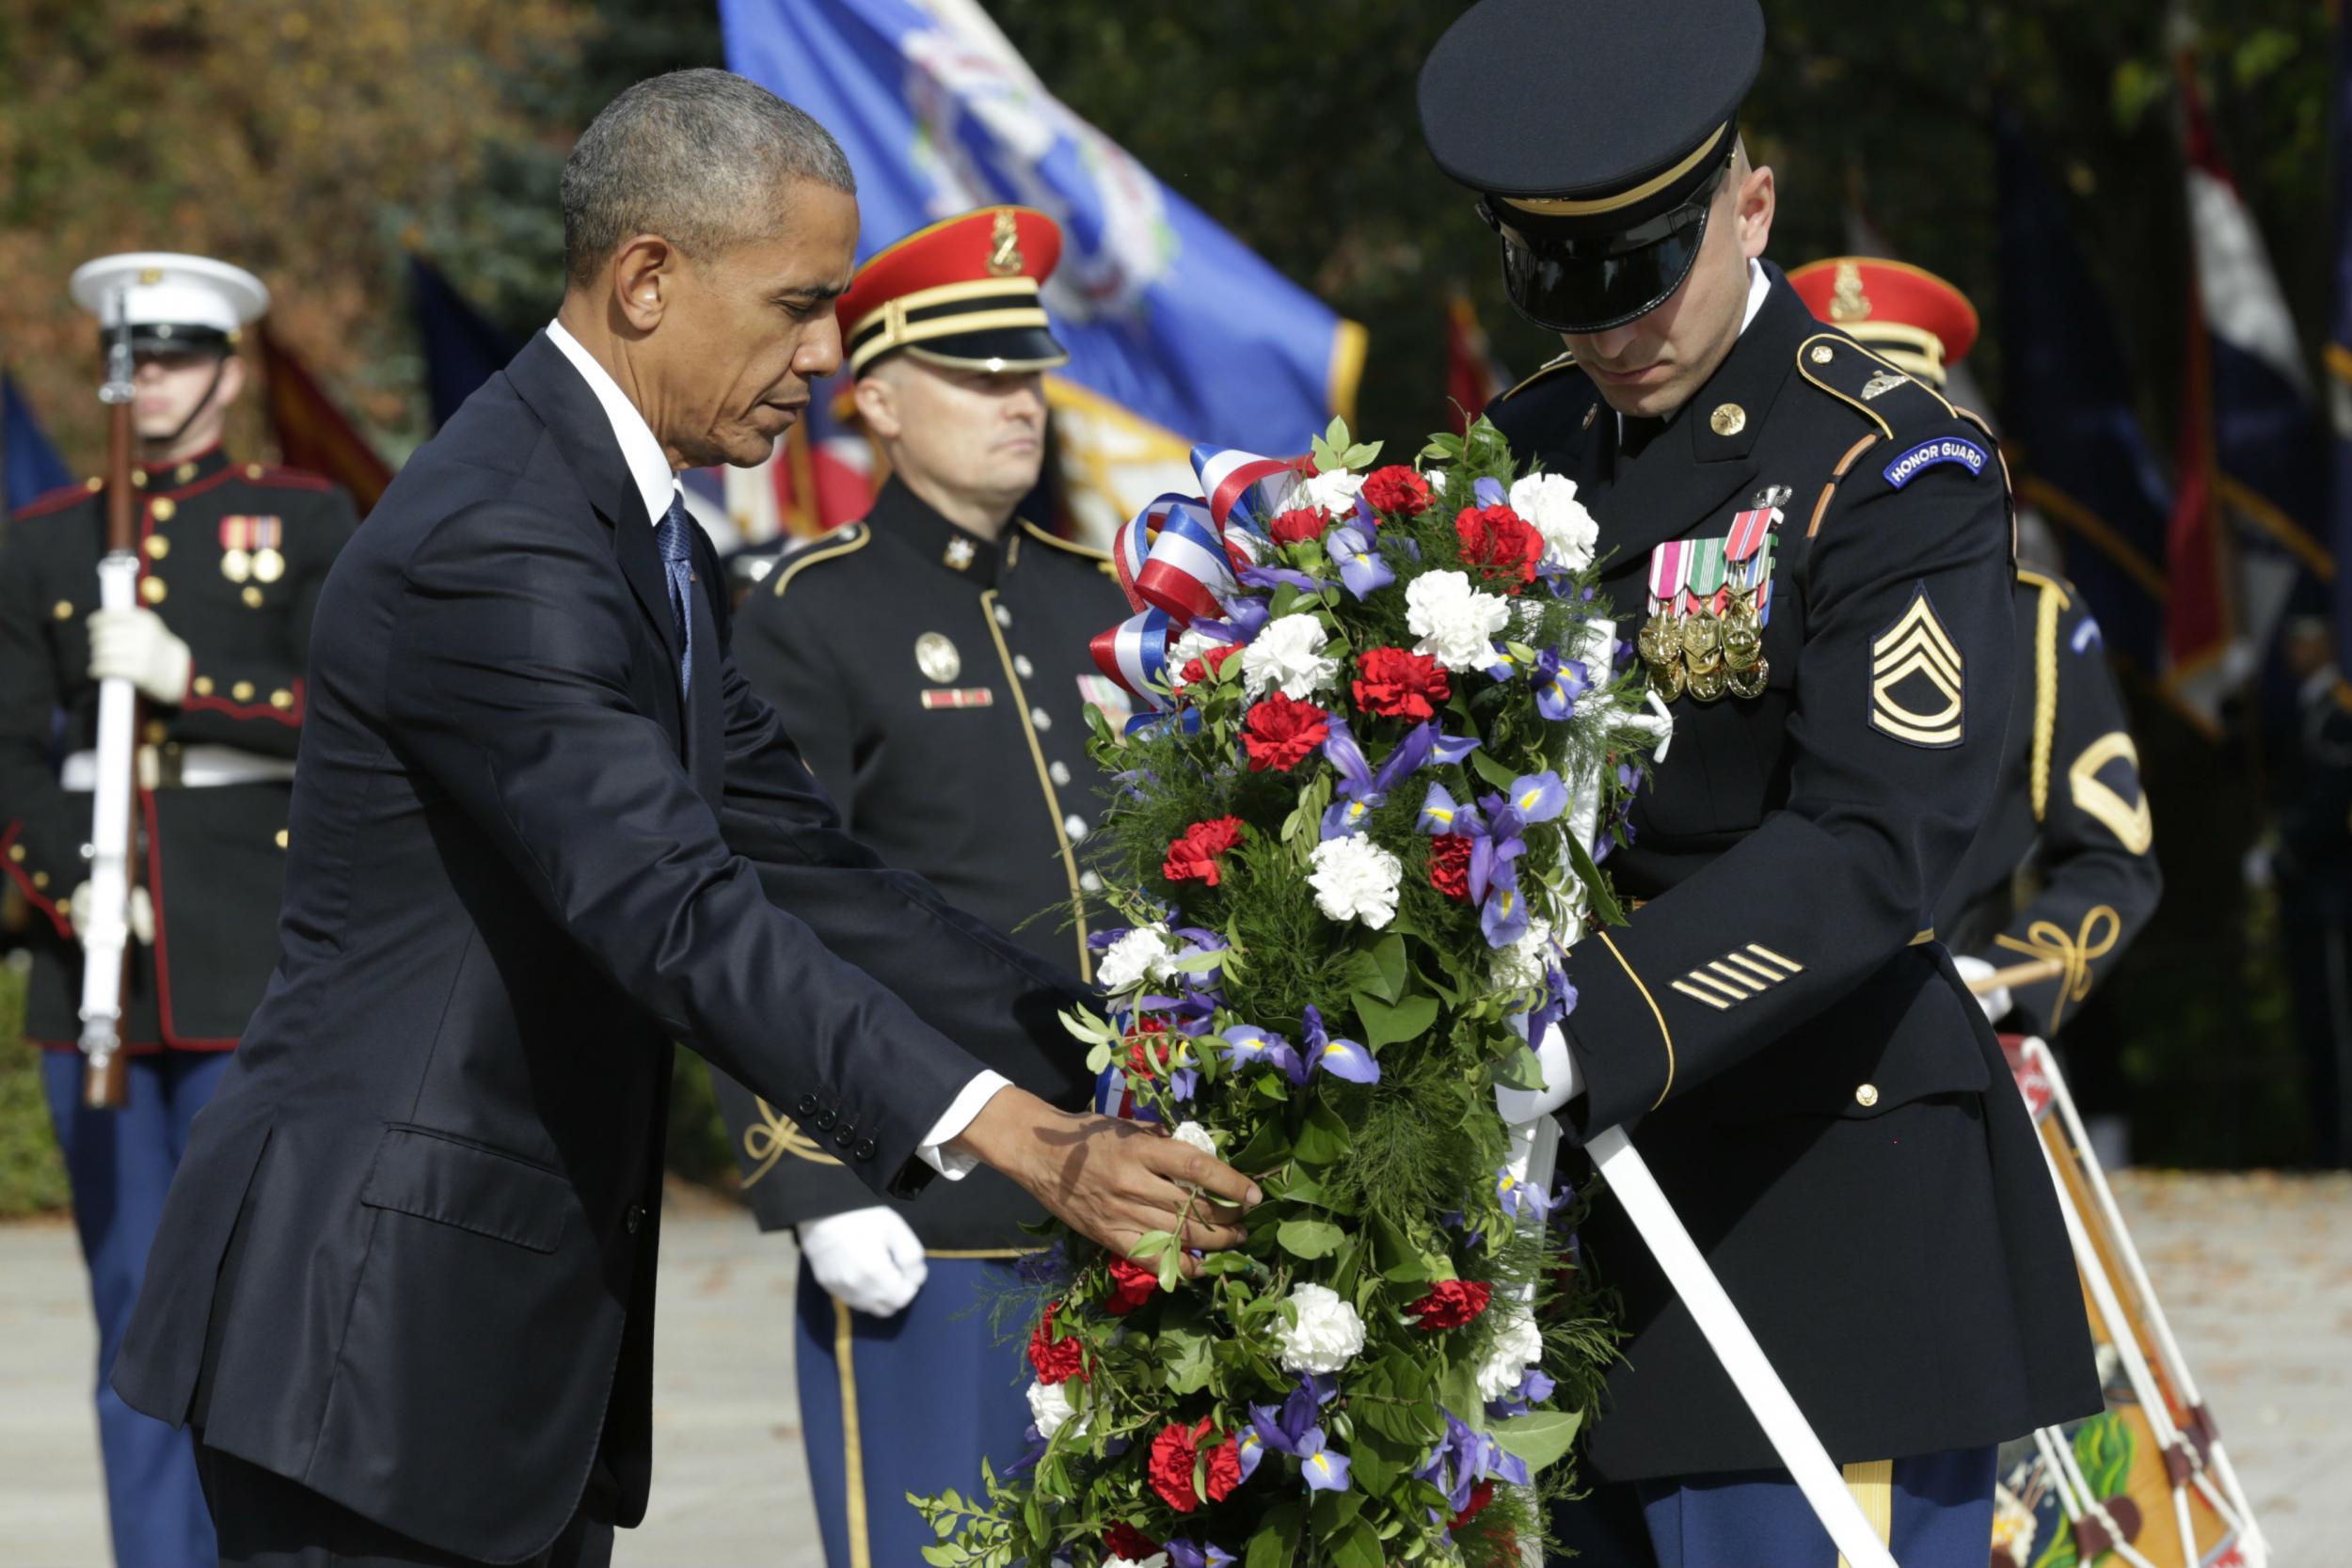 Mr Obama's former staff members have insisted he did speak with relatives of those killed in action